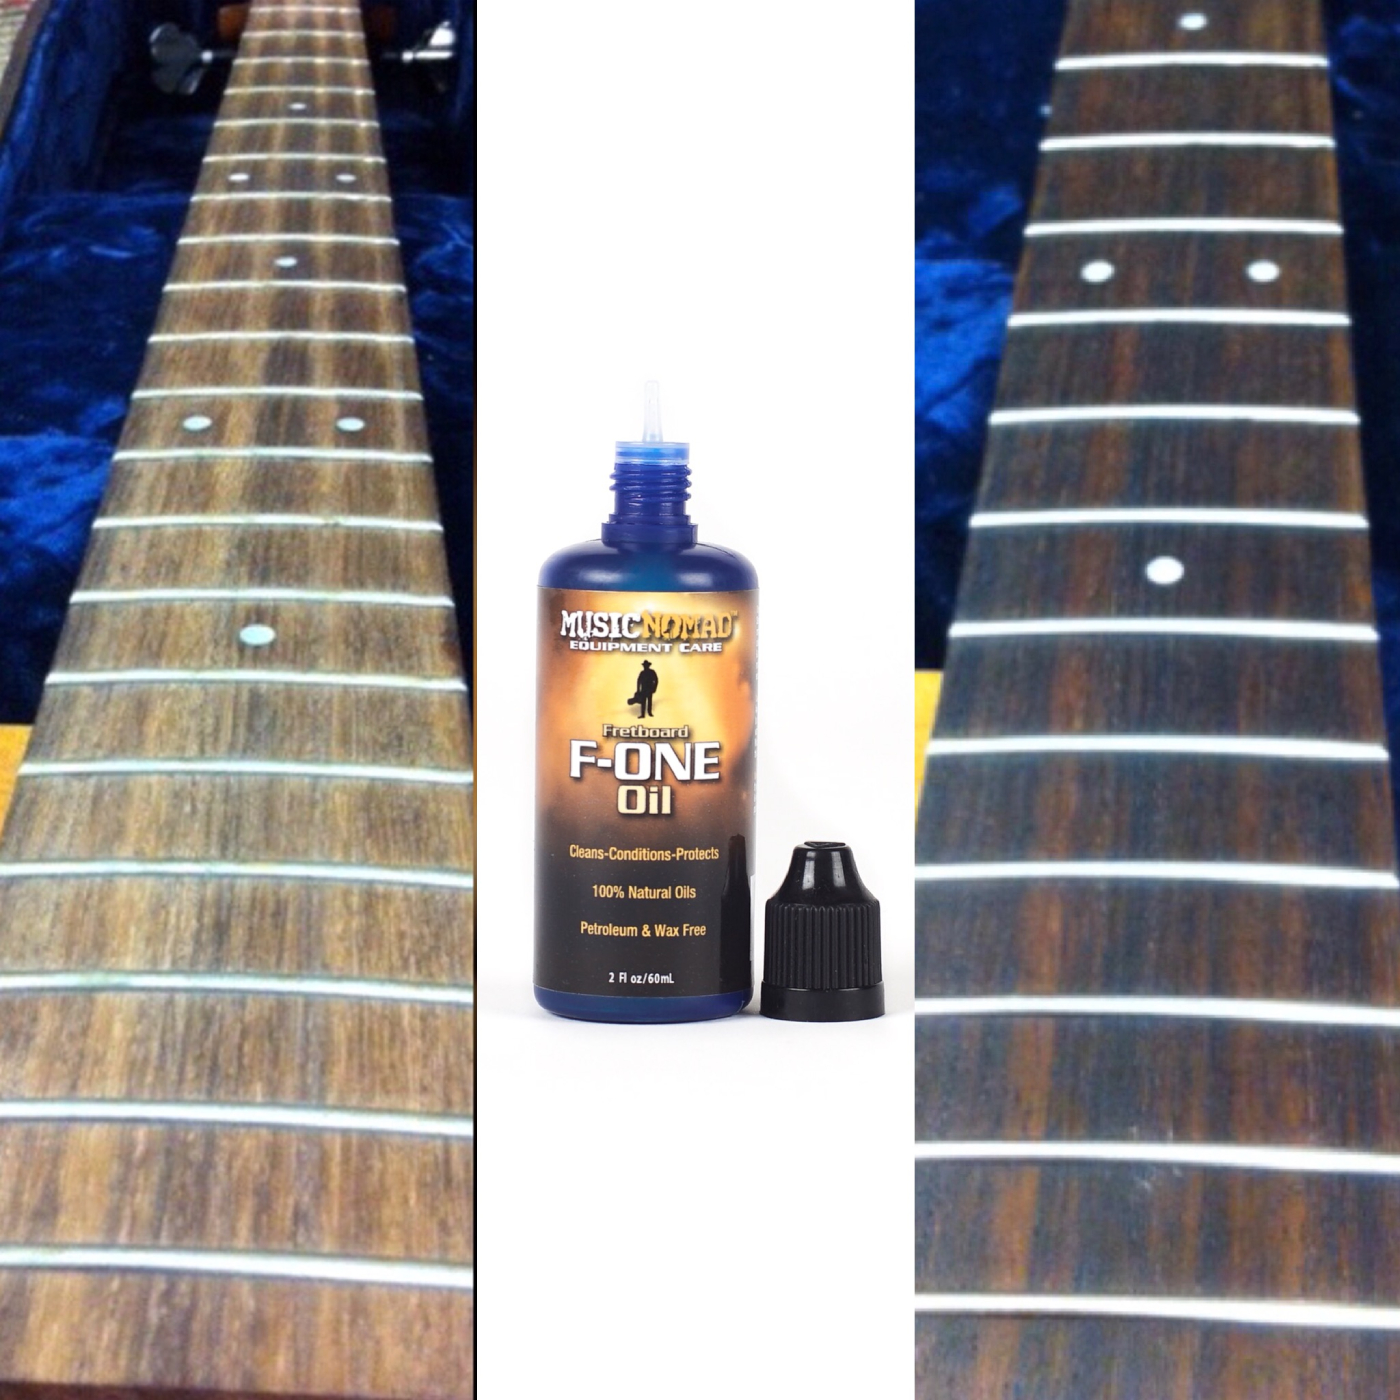 Musicnomad Mn105 - Fretboard F-one - Care & Cleaning - Variation 1